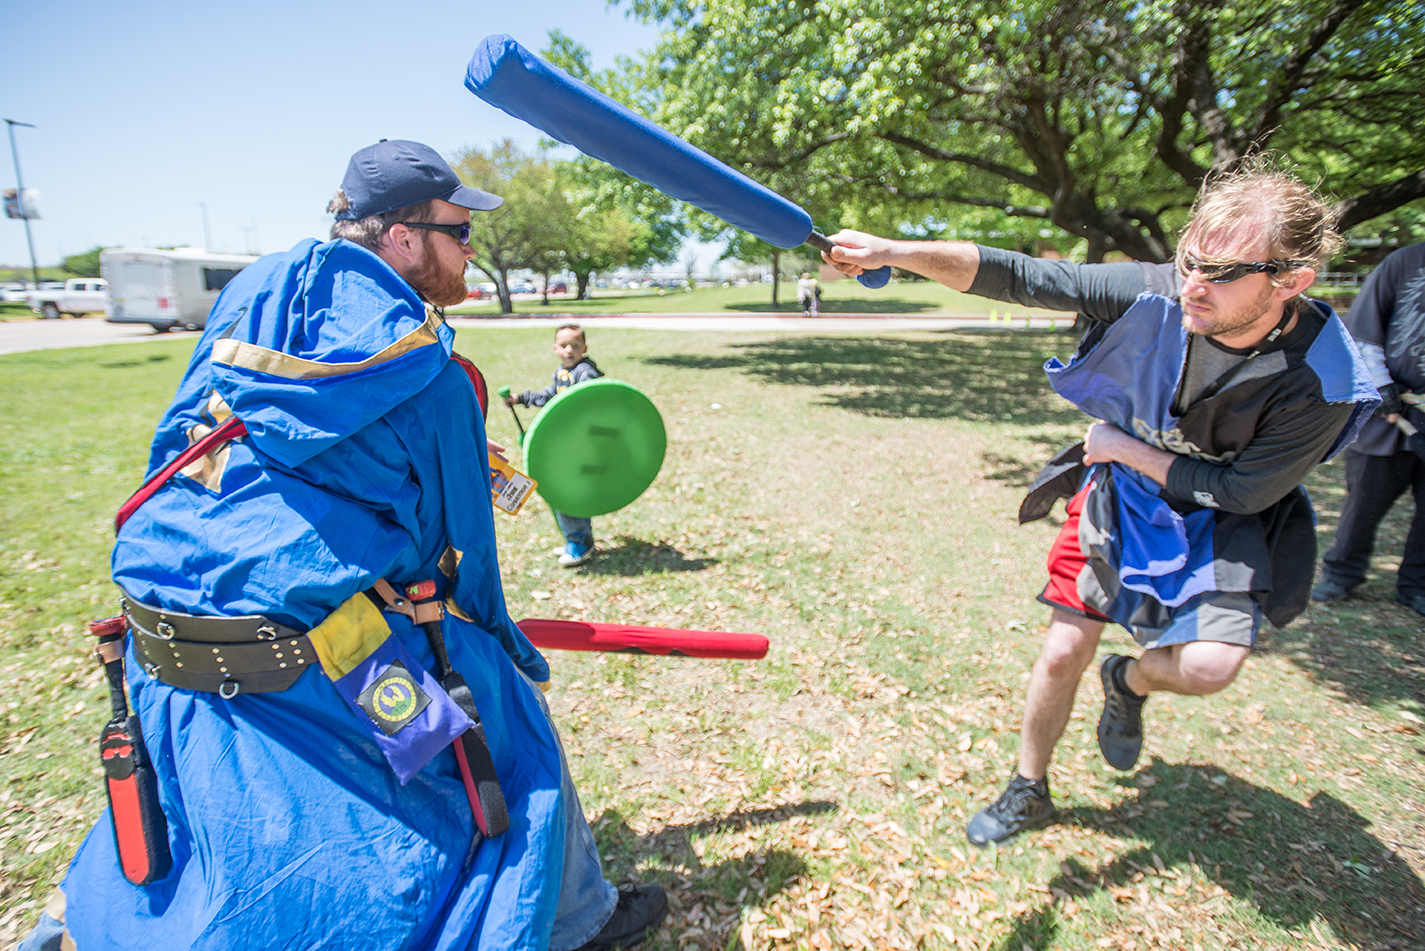 Benjamin Brace of Benbrook battles Donny “Peasant” Neff during a live action role play of a scene from Dr. Who at the South Campus Anime Convention April 14. The two-day event celebrated all things anime and gaming. See more on page 10.